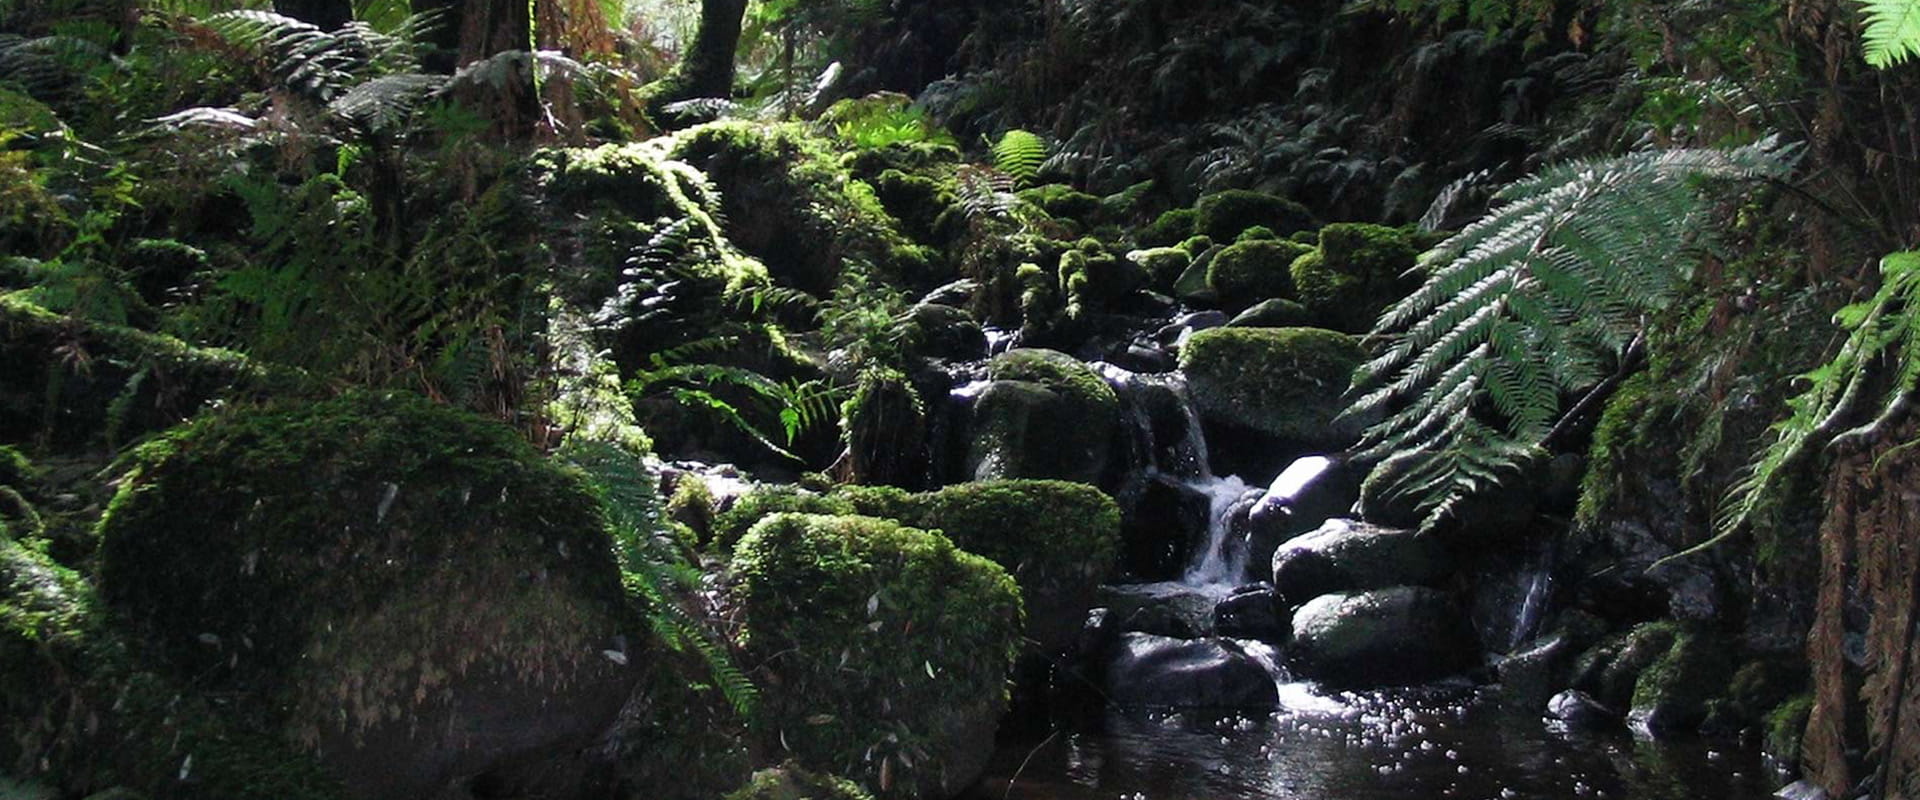 A lush waterfall surrounded by moss covered rocks and tree ferns